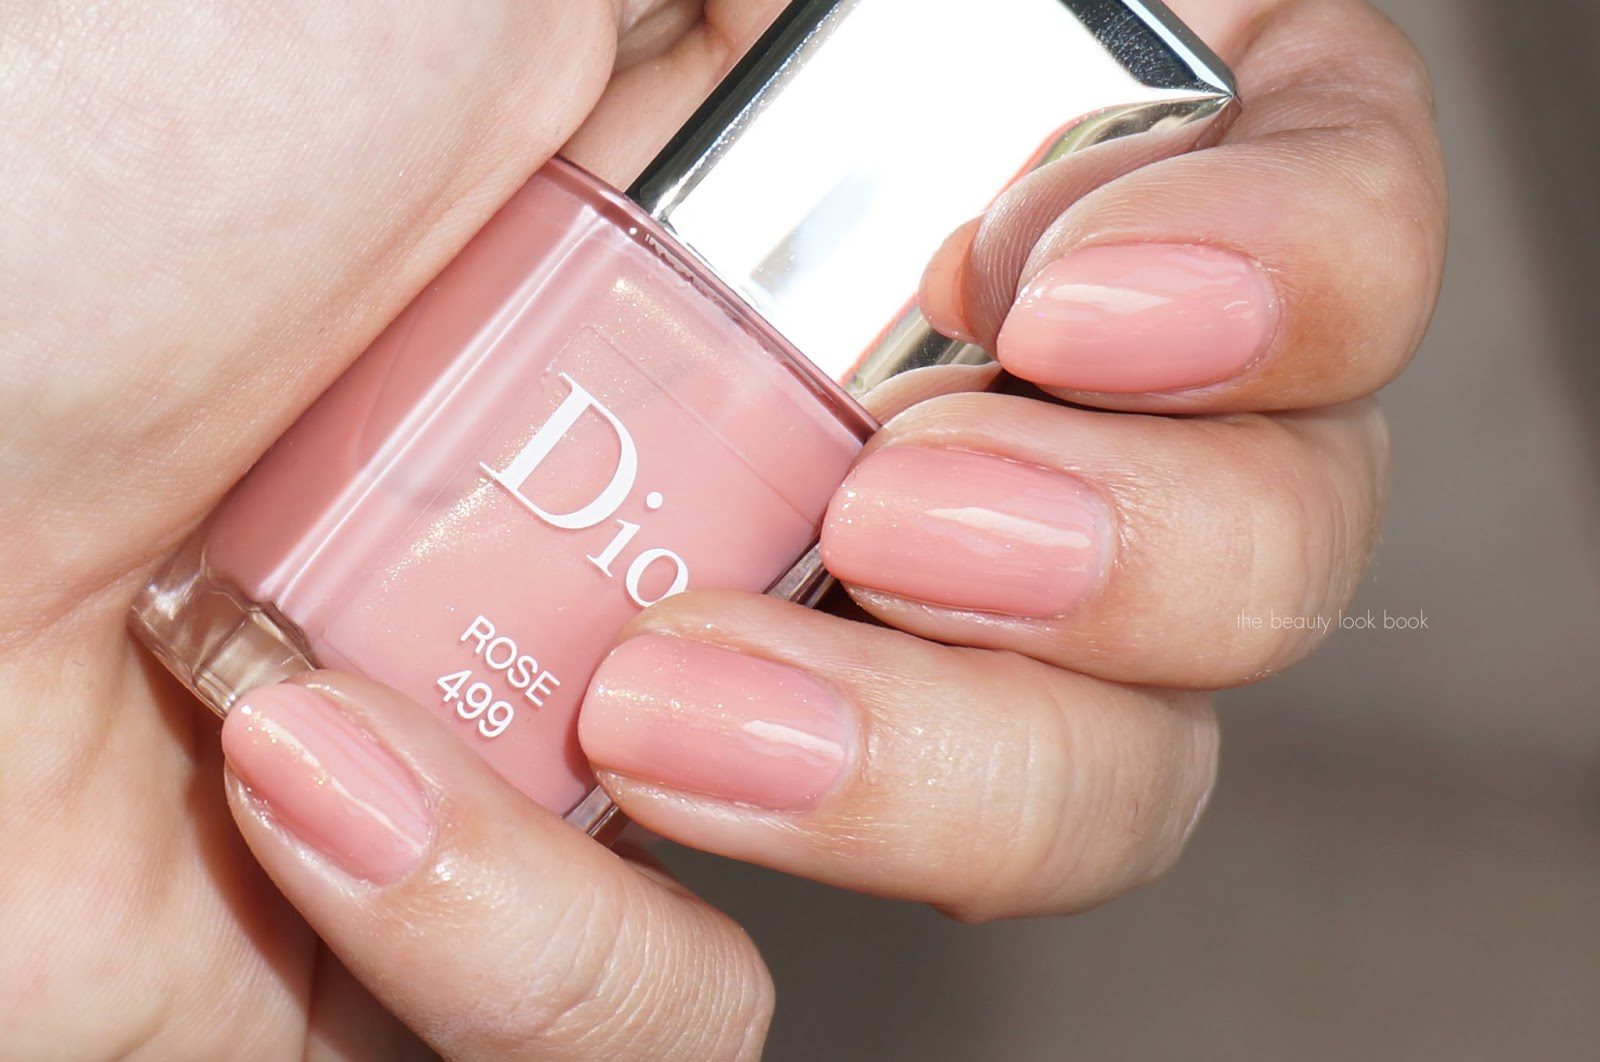 Dior Vernis Spring 2015 Limited Edition Nail Polish in 499 Rose